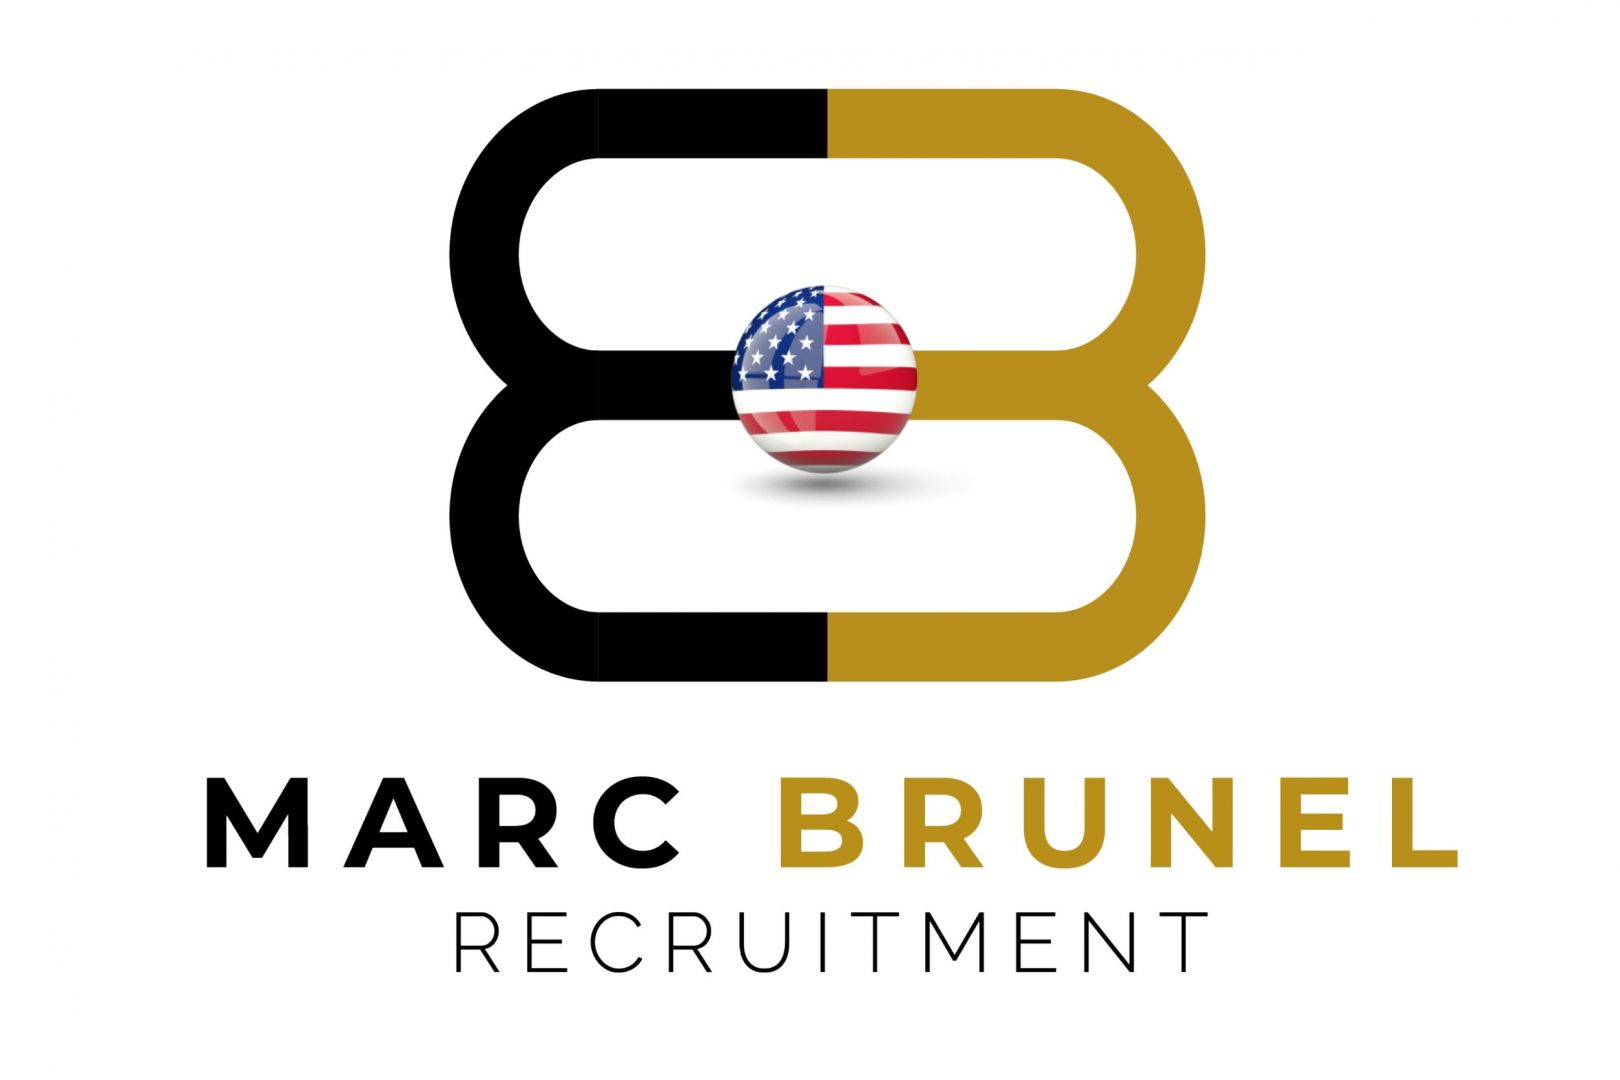 Marc Brunel Recruitment goes to the United States by confirming new California-based consultancy at PortalAutomotriz.com